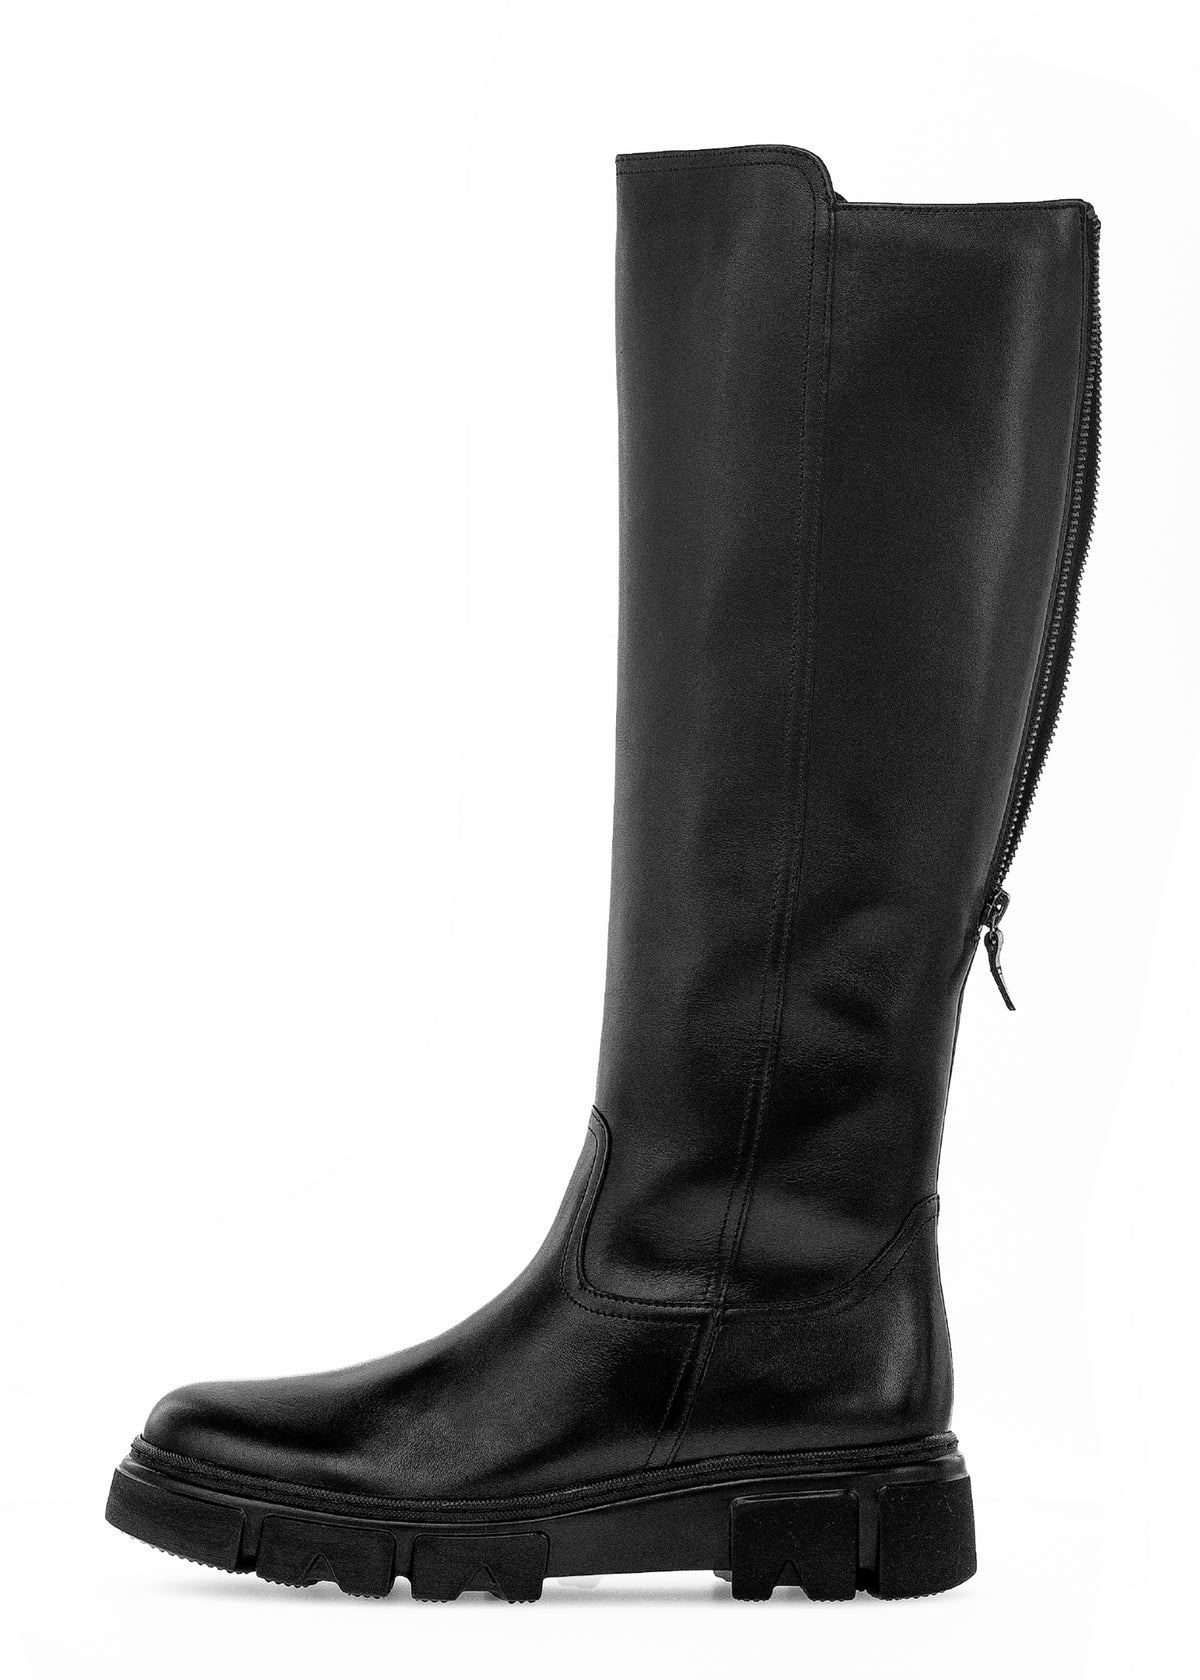 Boots with a thick sole - black, adjustable ML shaft